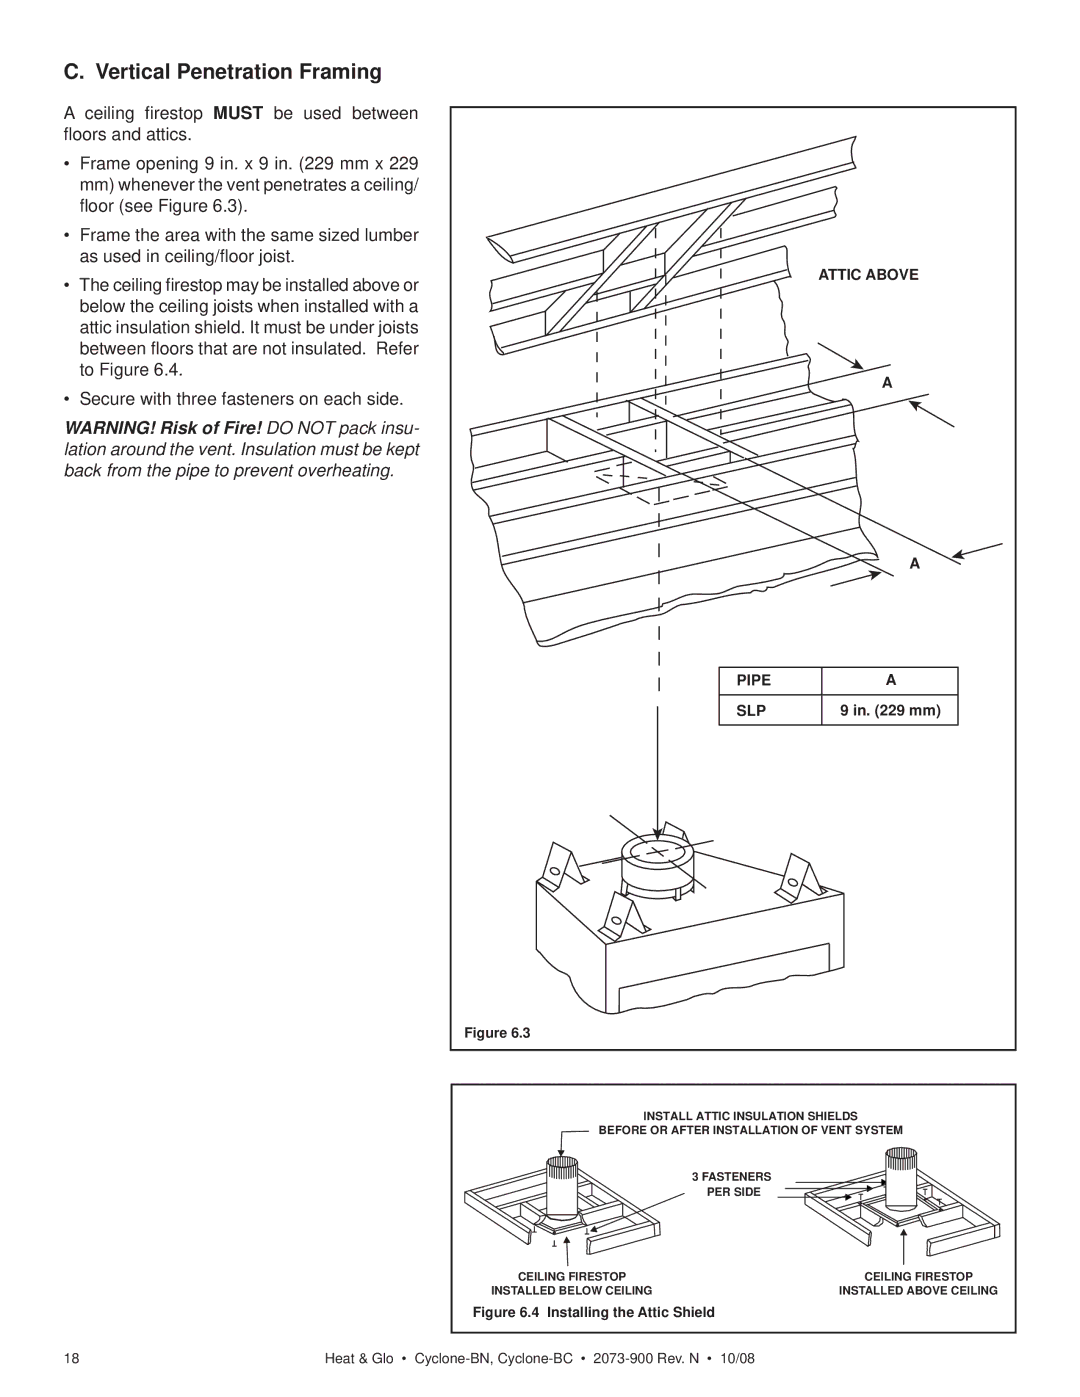 Hearth and Home Technologies Cyclone-BC, Cyclone-BN owner manual Vertical Penetration Framing, Pipe SLP 